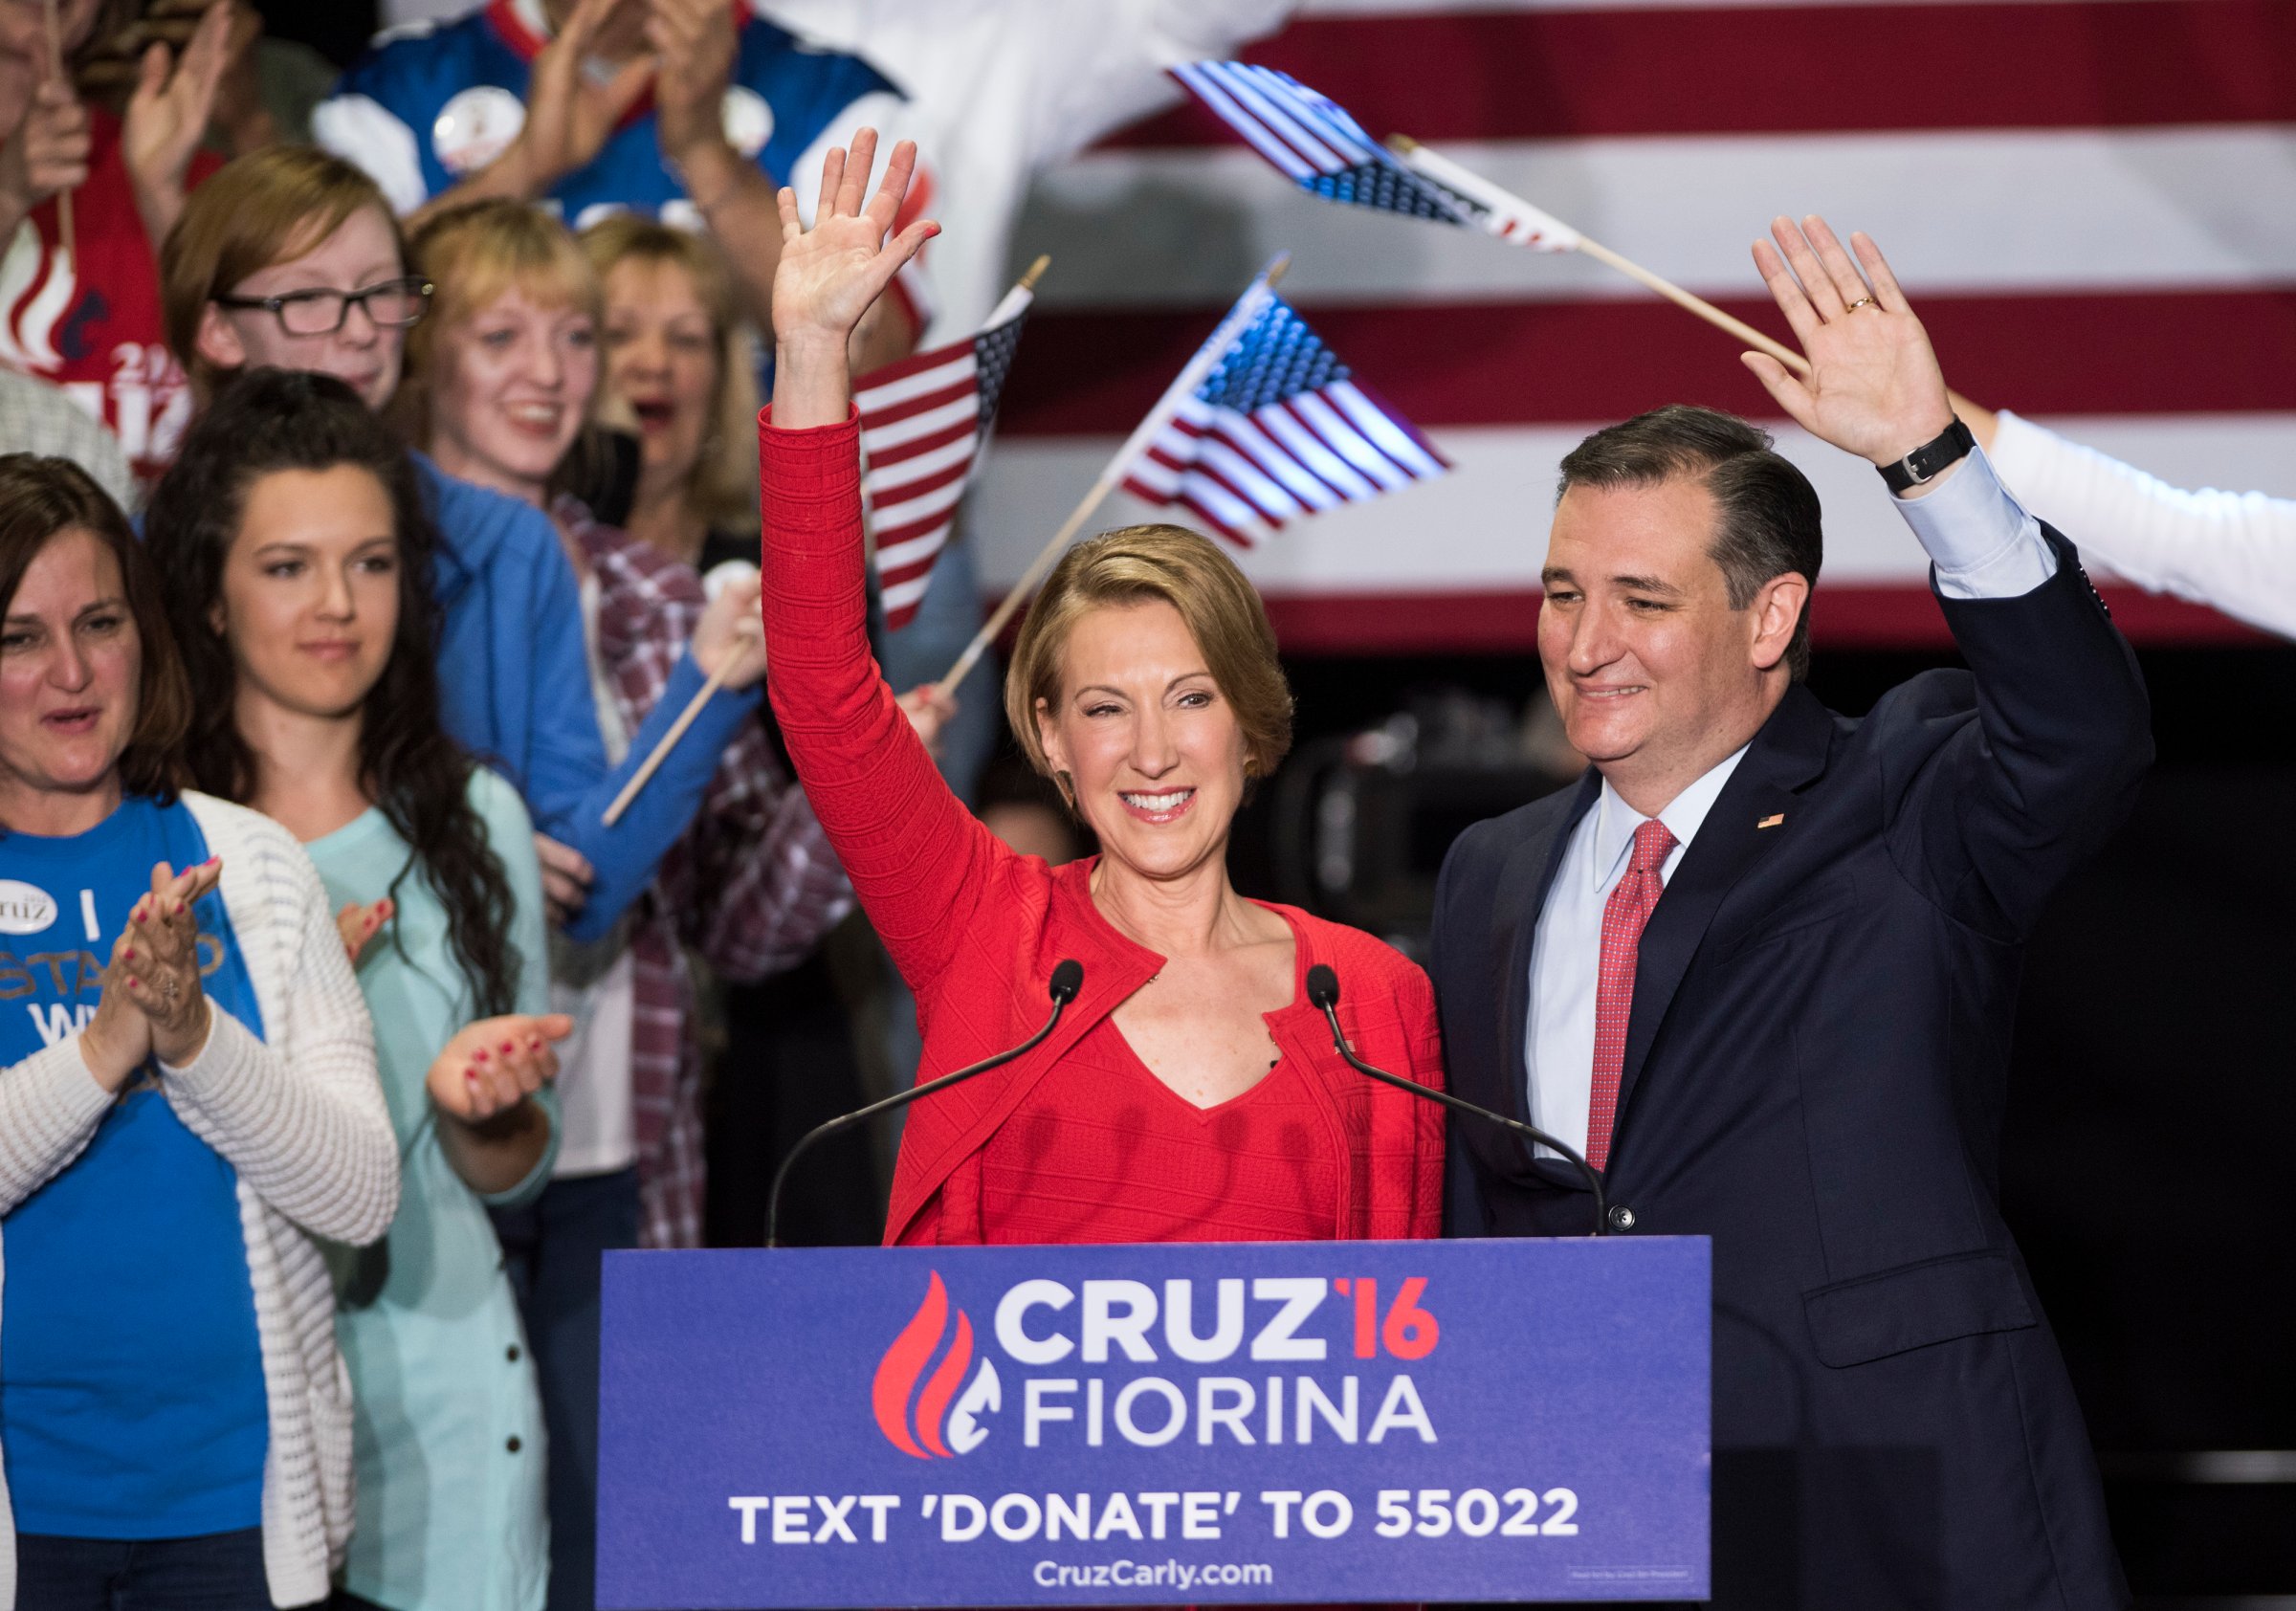 Republican presidential candidate Sen. Ted Cruz (R-TX) (R) greets supporters with former Hewlett-Packard chief executive Carly Fiorina at a campaign rally in the Pavilion at the Pan Am Plaza in Indianapolis on April 27, 2016.